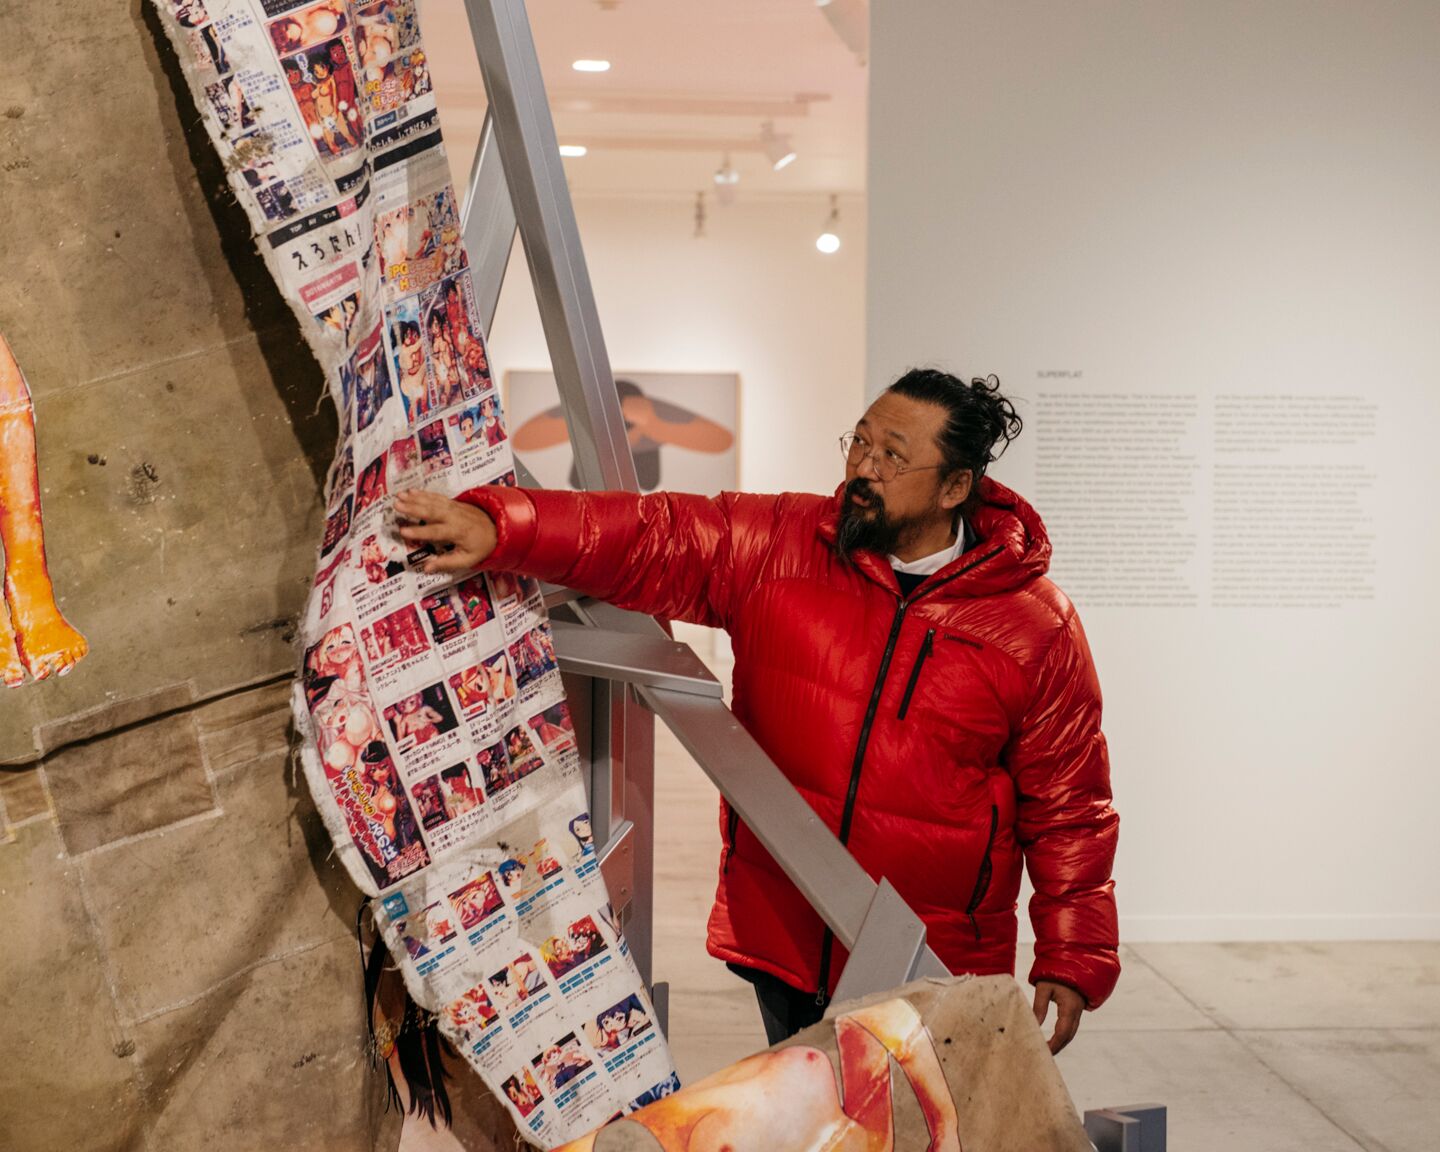 Takashi Murakami discussing with work with media